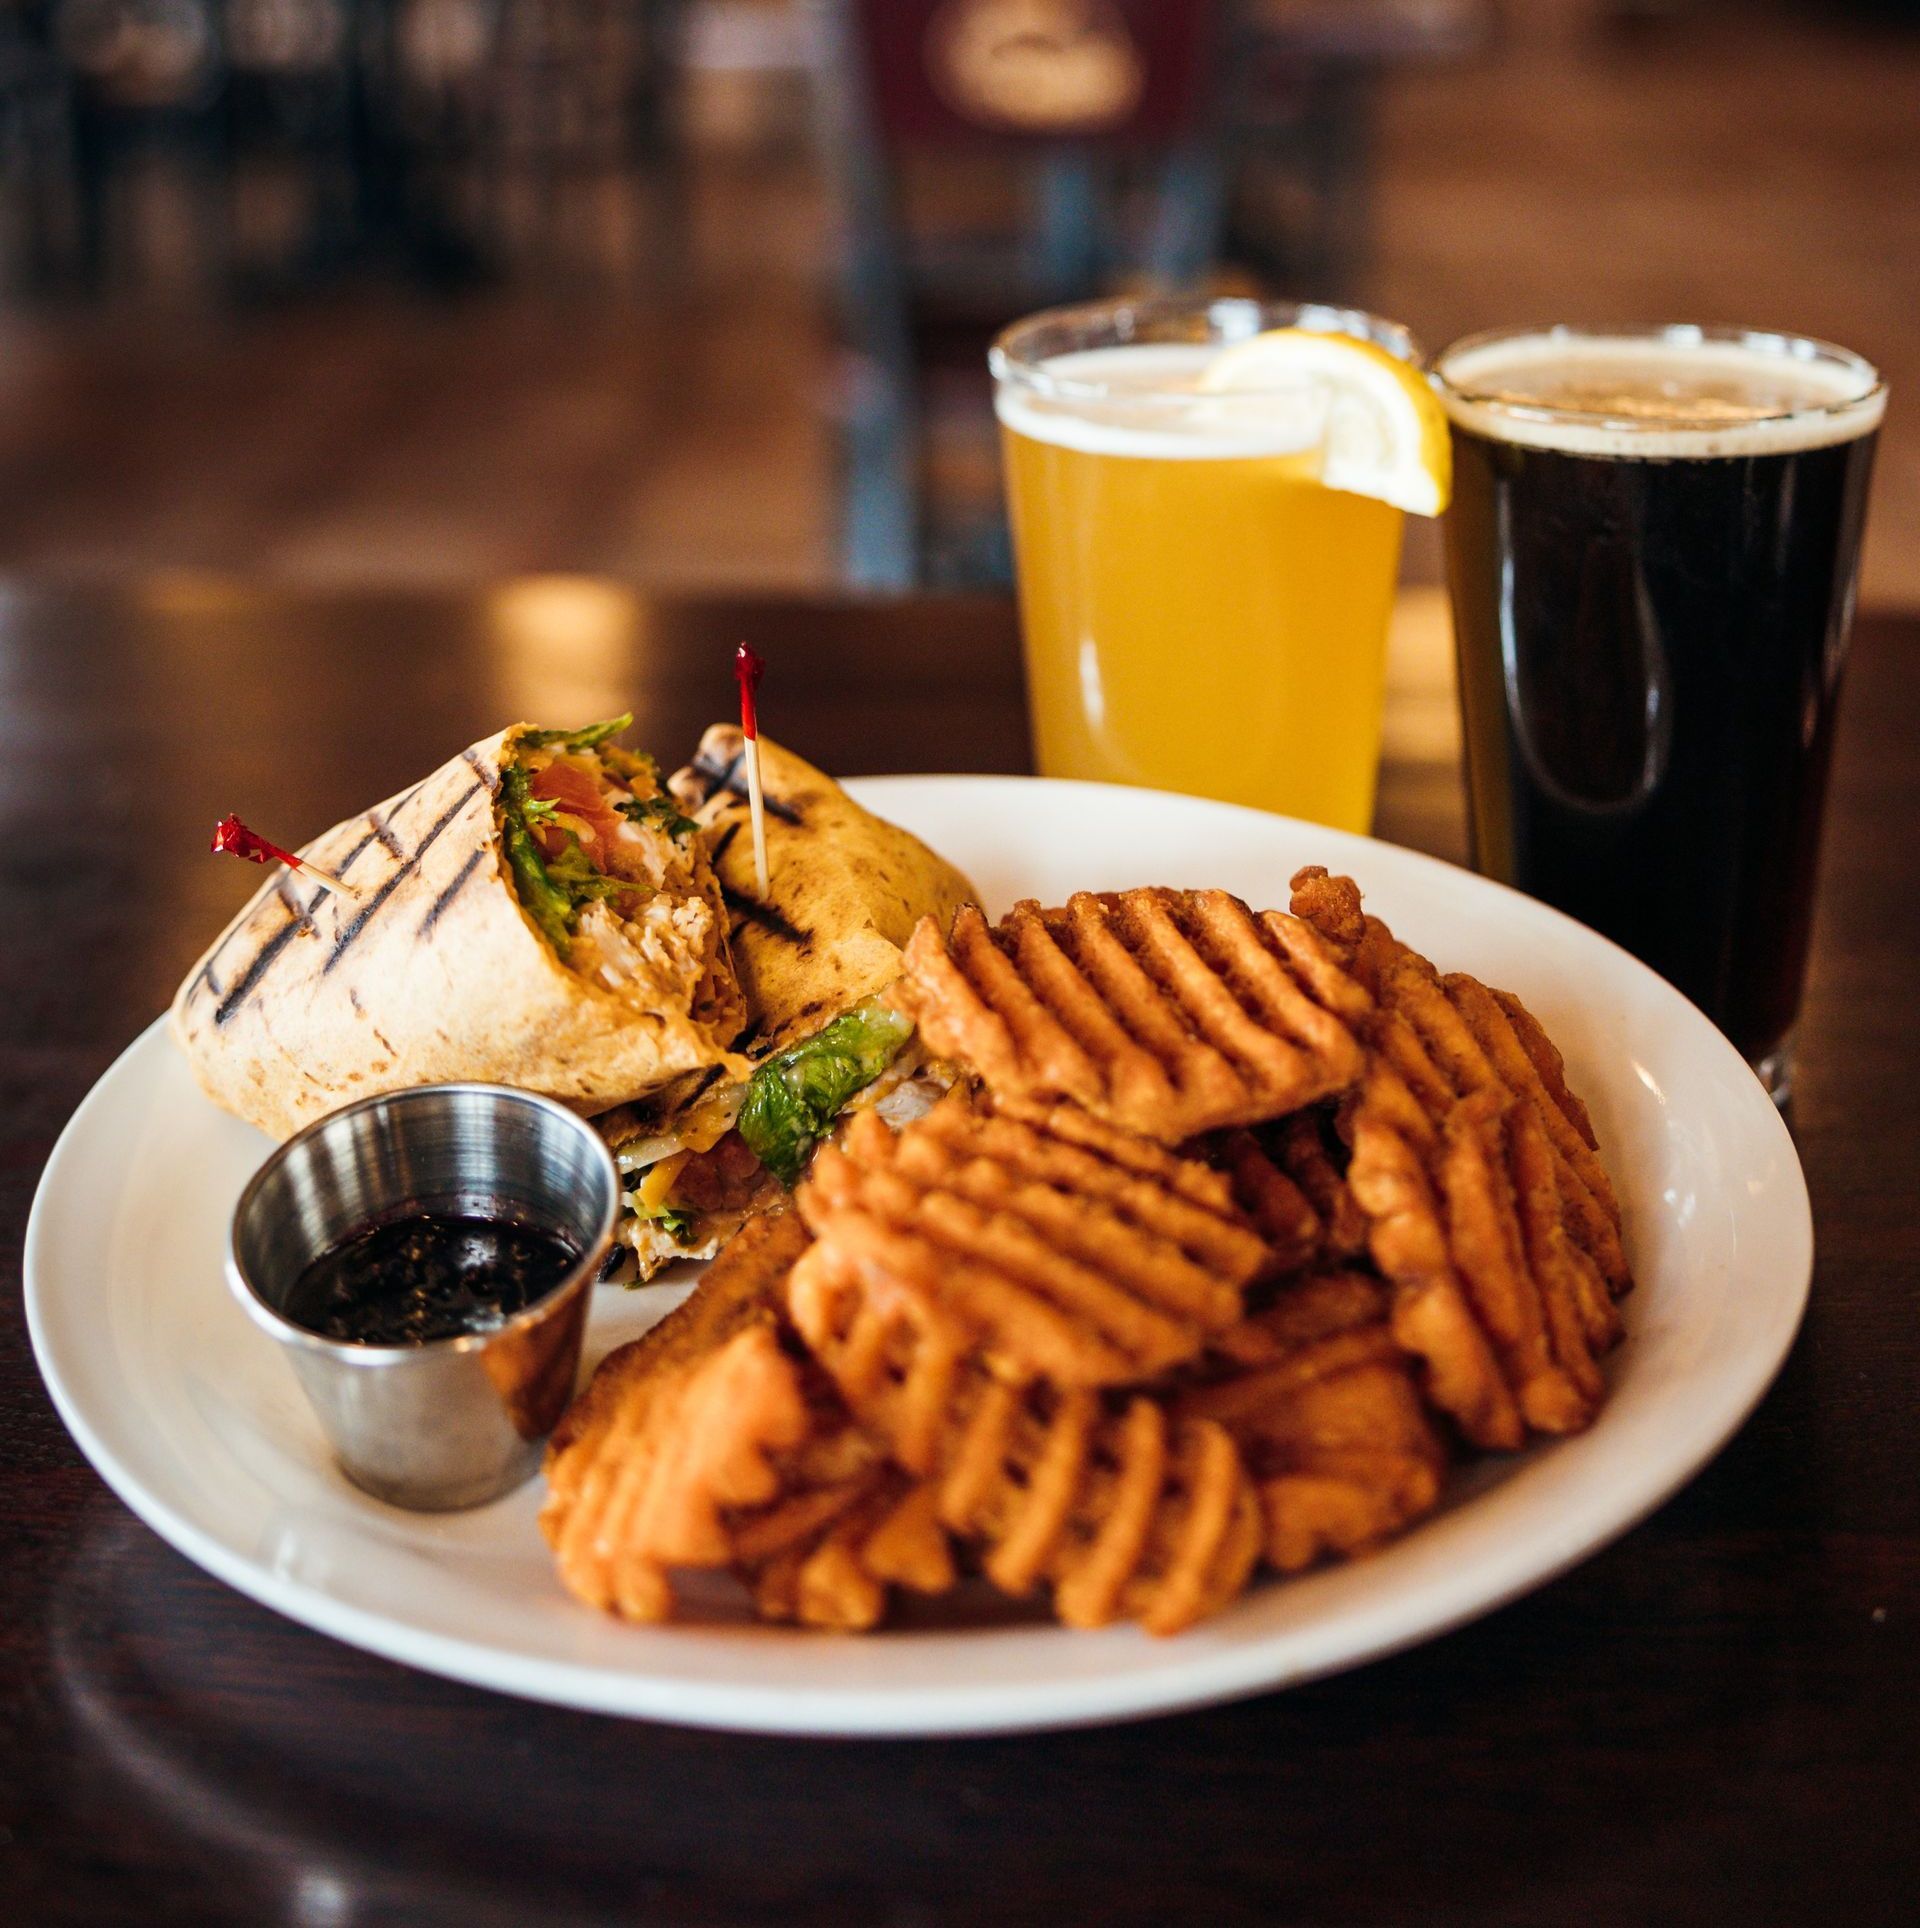 Pair Your Meal With Your Favorite Local Beer or Domestic Draft at the Hill in Holts Summit, MO.